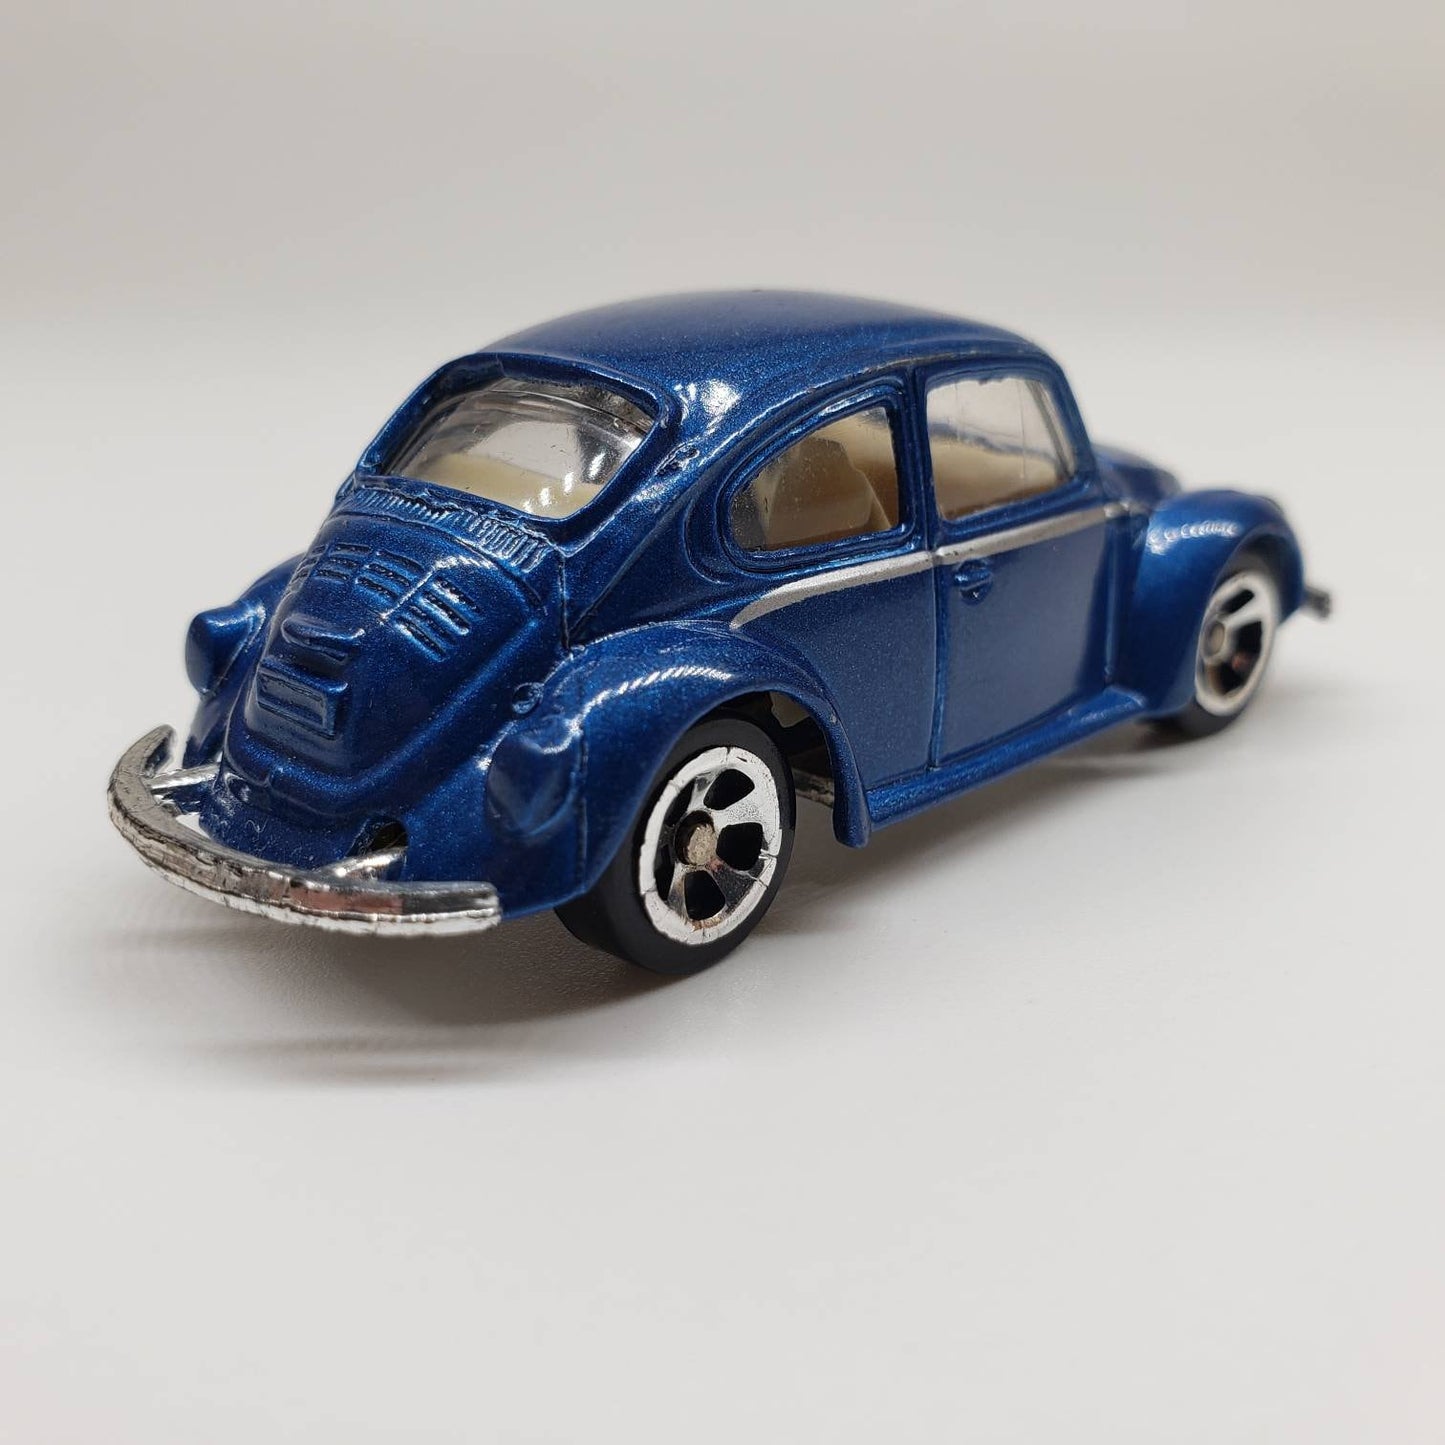 Maisto VW 1300 Blue Historic Hit Perfect Birthday Gift Miniature Collectable Scale Model Toy Car